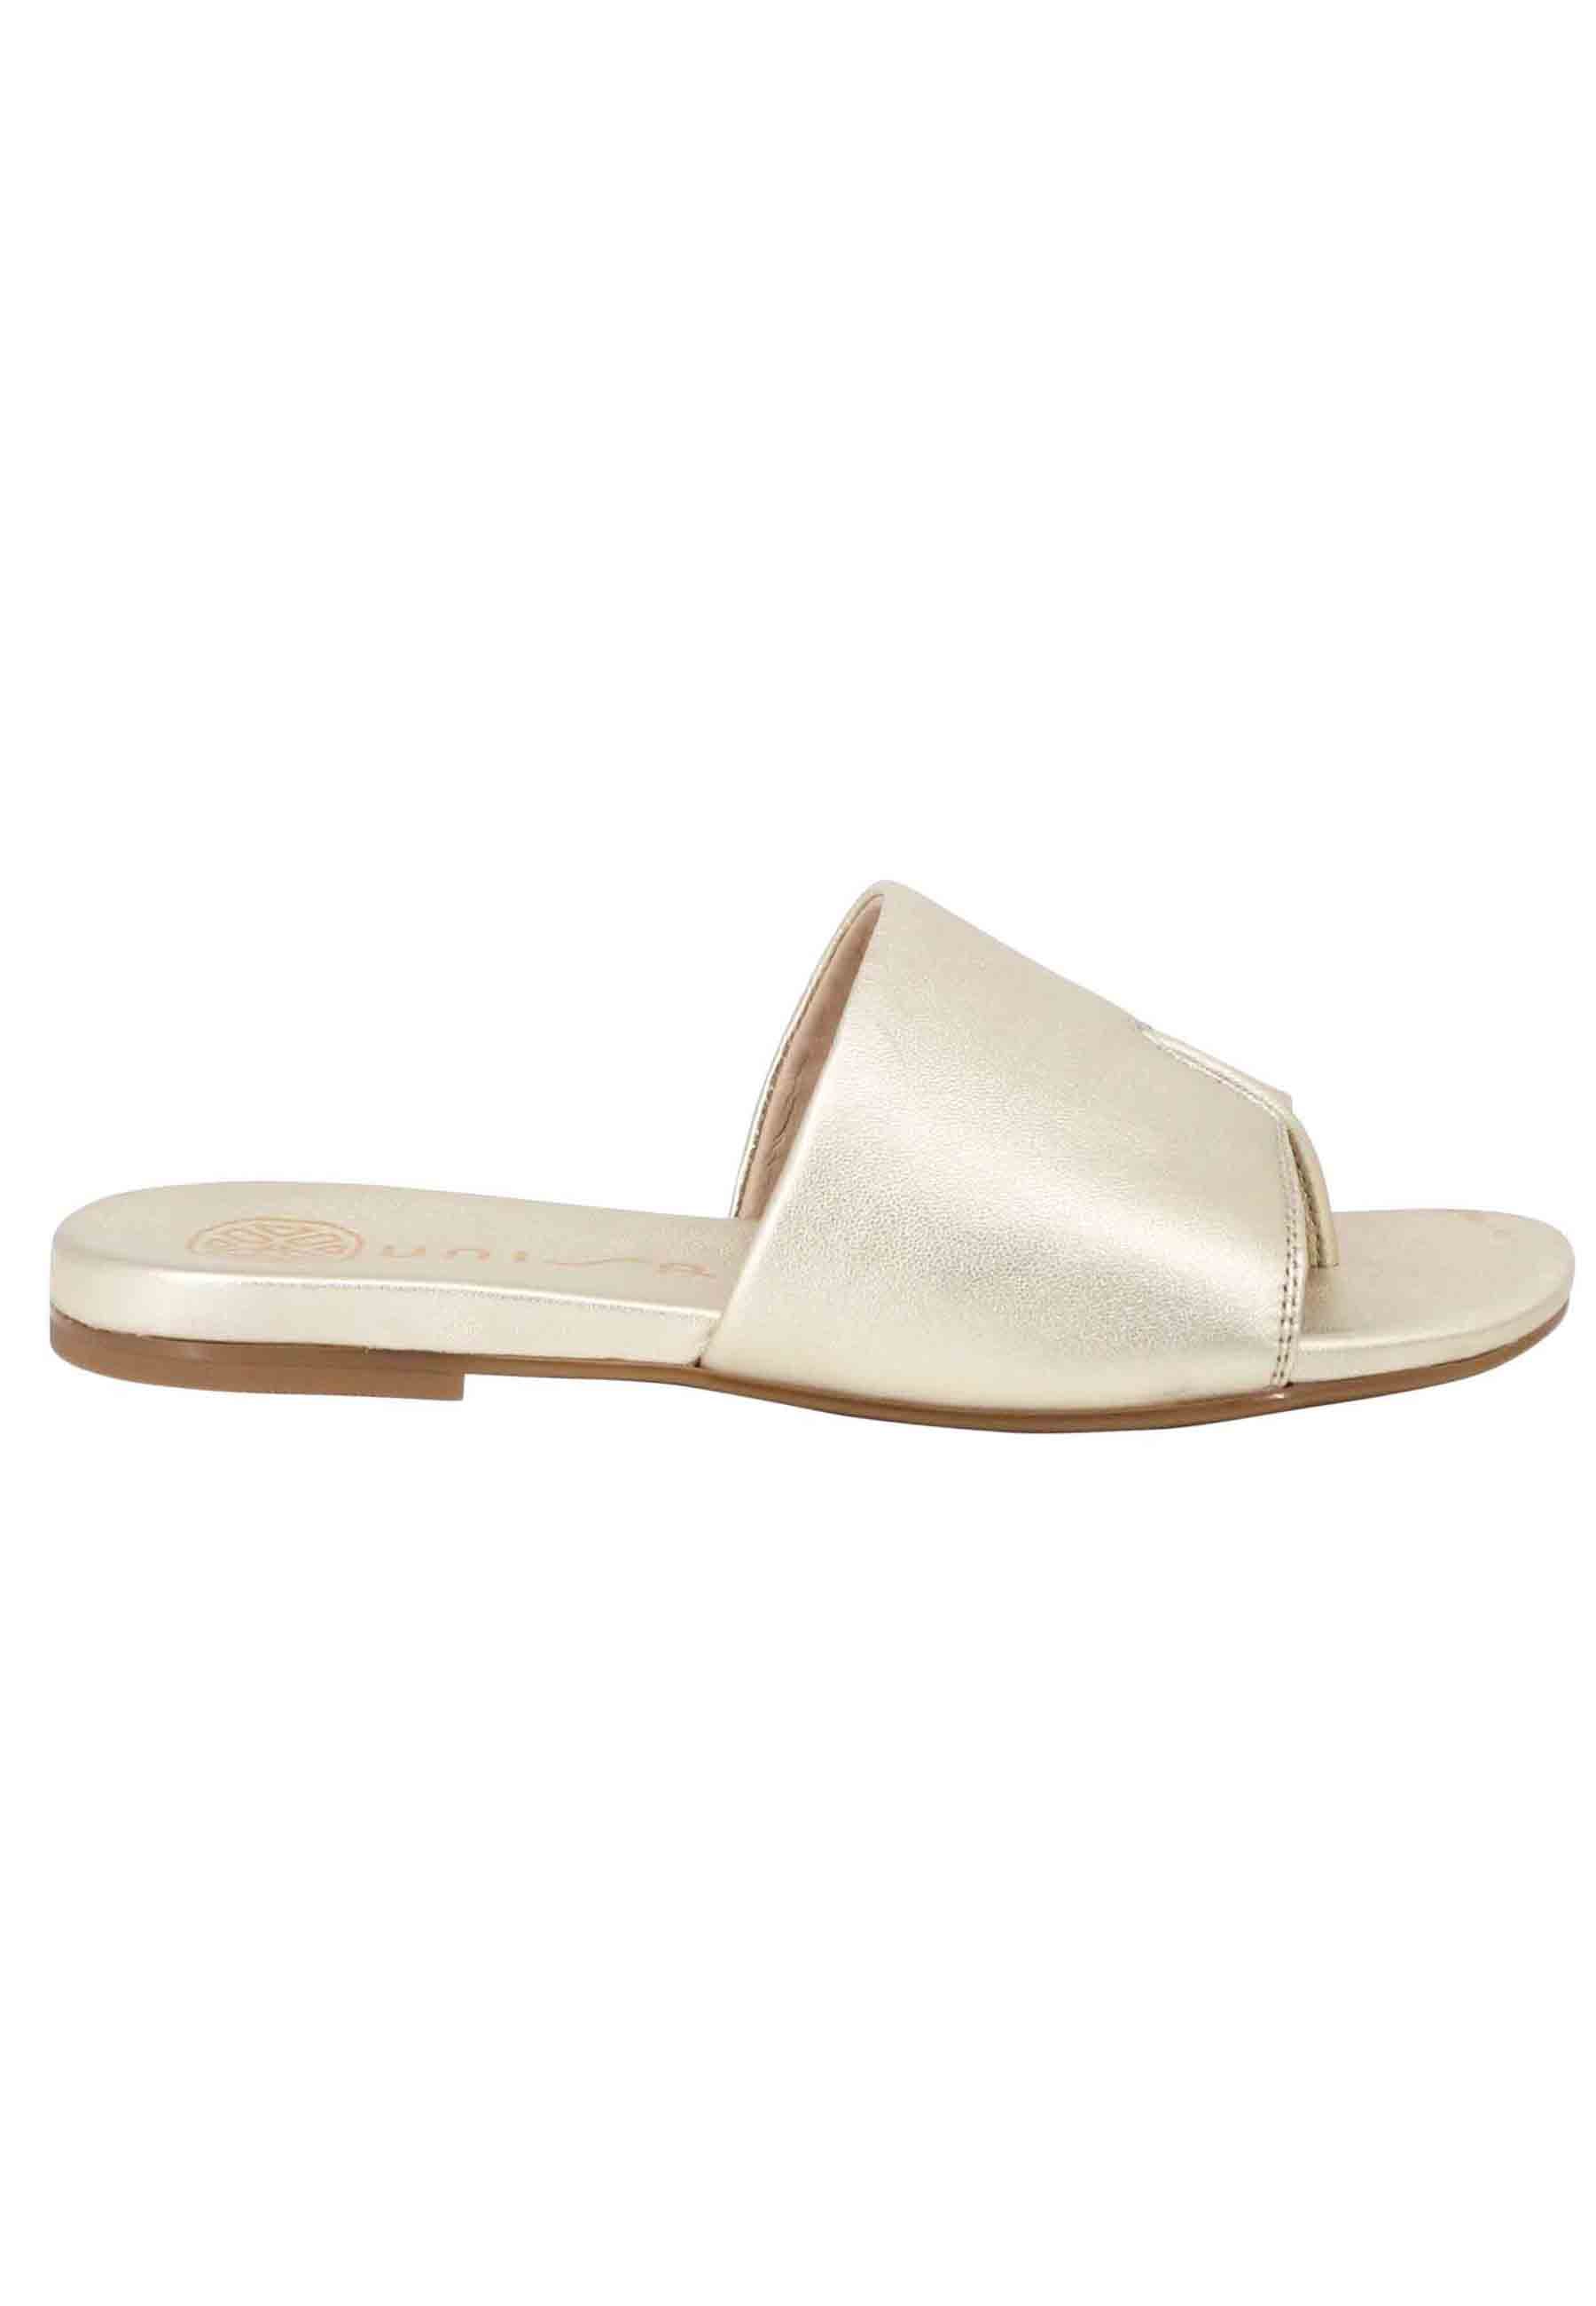 Women's flat thong sandals in platinum laminated leather with rubber sole